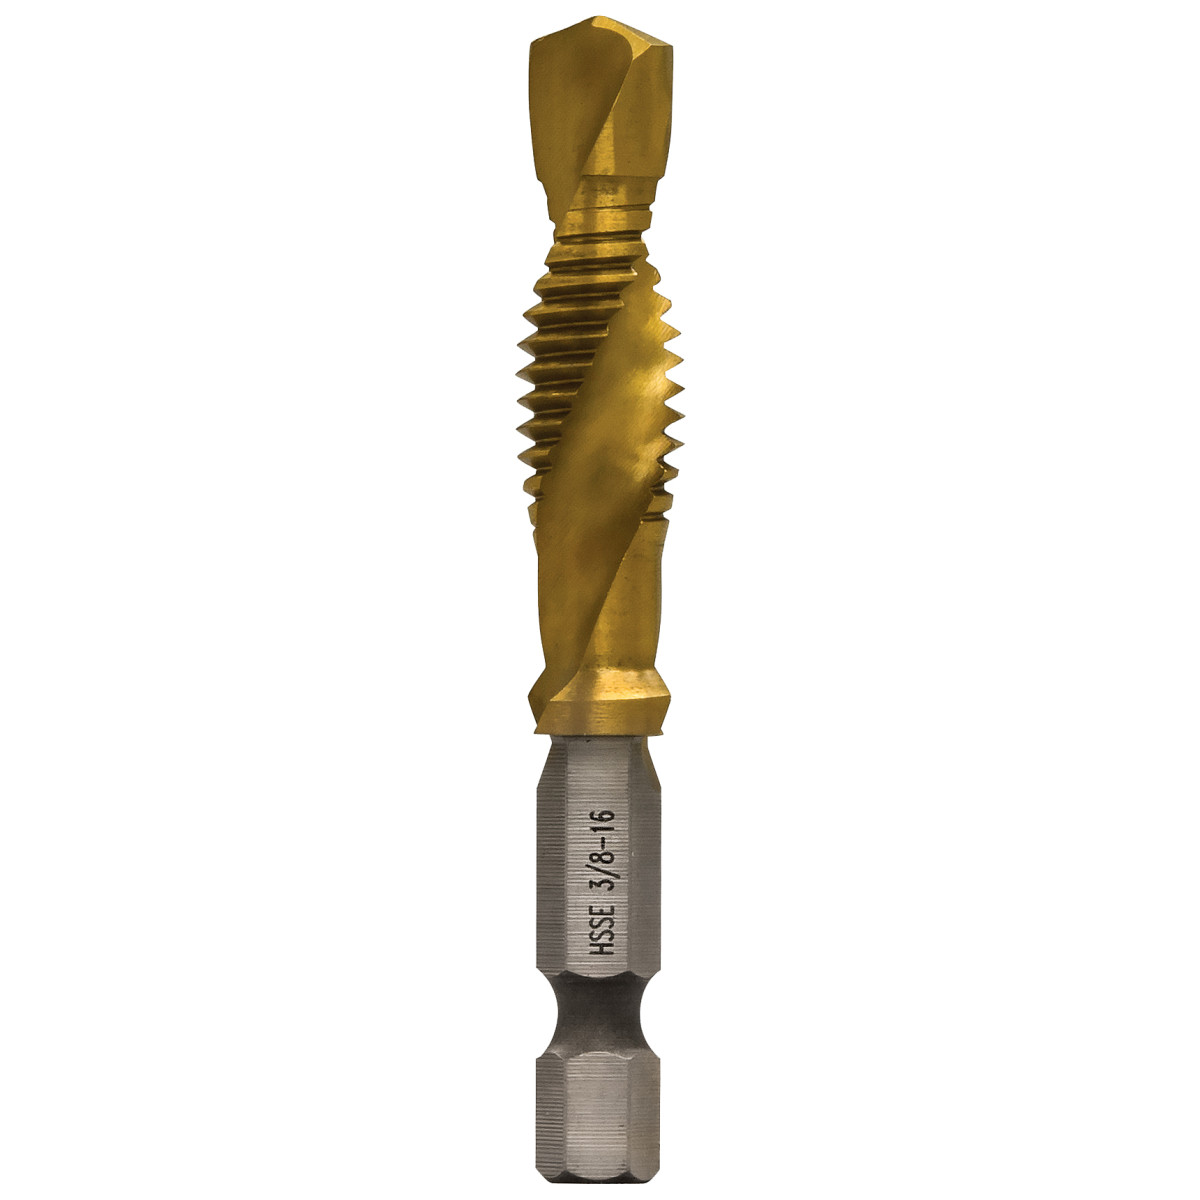 3/8-16 Split-point tip resists walking and penetrates material faster. Strong, high-speed steel provides superior resistance to heat and abrasion. Titanium Nitride coating ensures that the bits run cooler, drill faster, and last longer. Optimized core for significantly reduced torque on the user and extended tool life. Designed to drill in up to 1/4